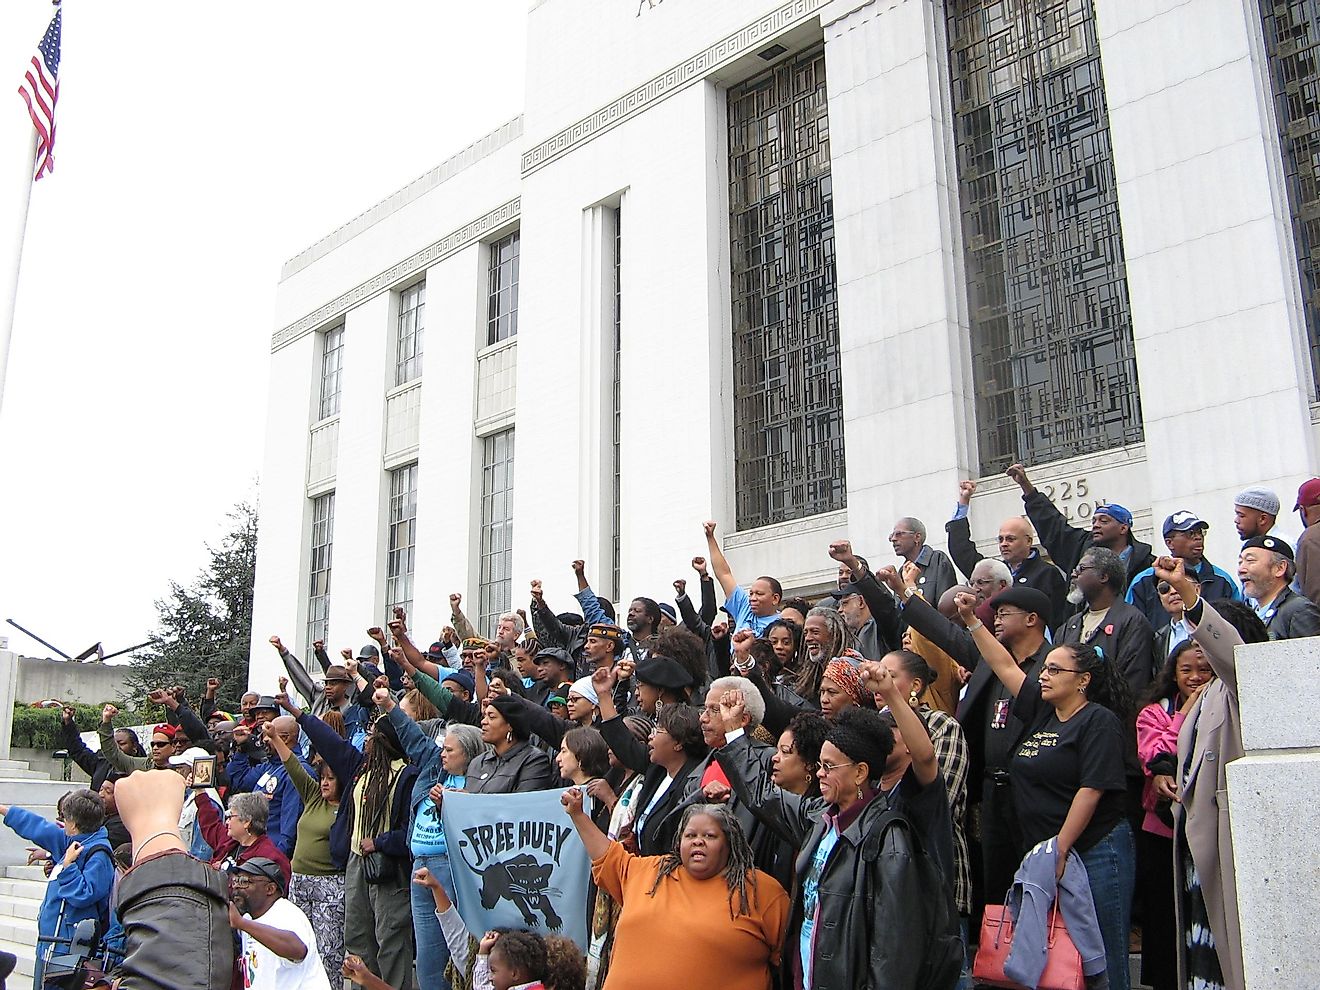 The 40th Reunion Meet Of The Black Panther Party In 2006